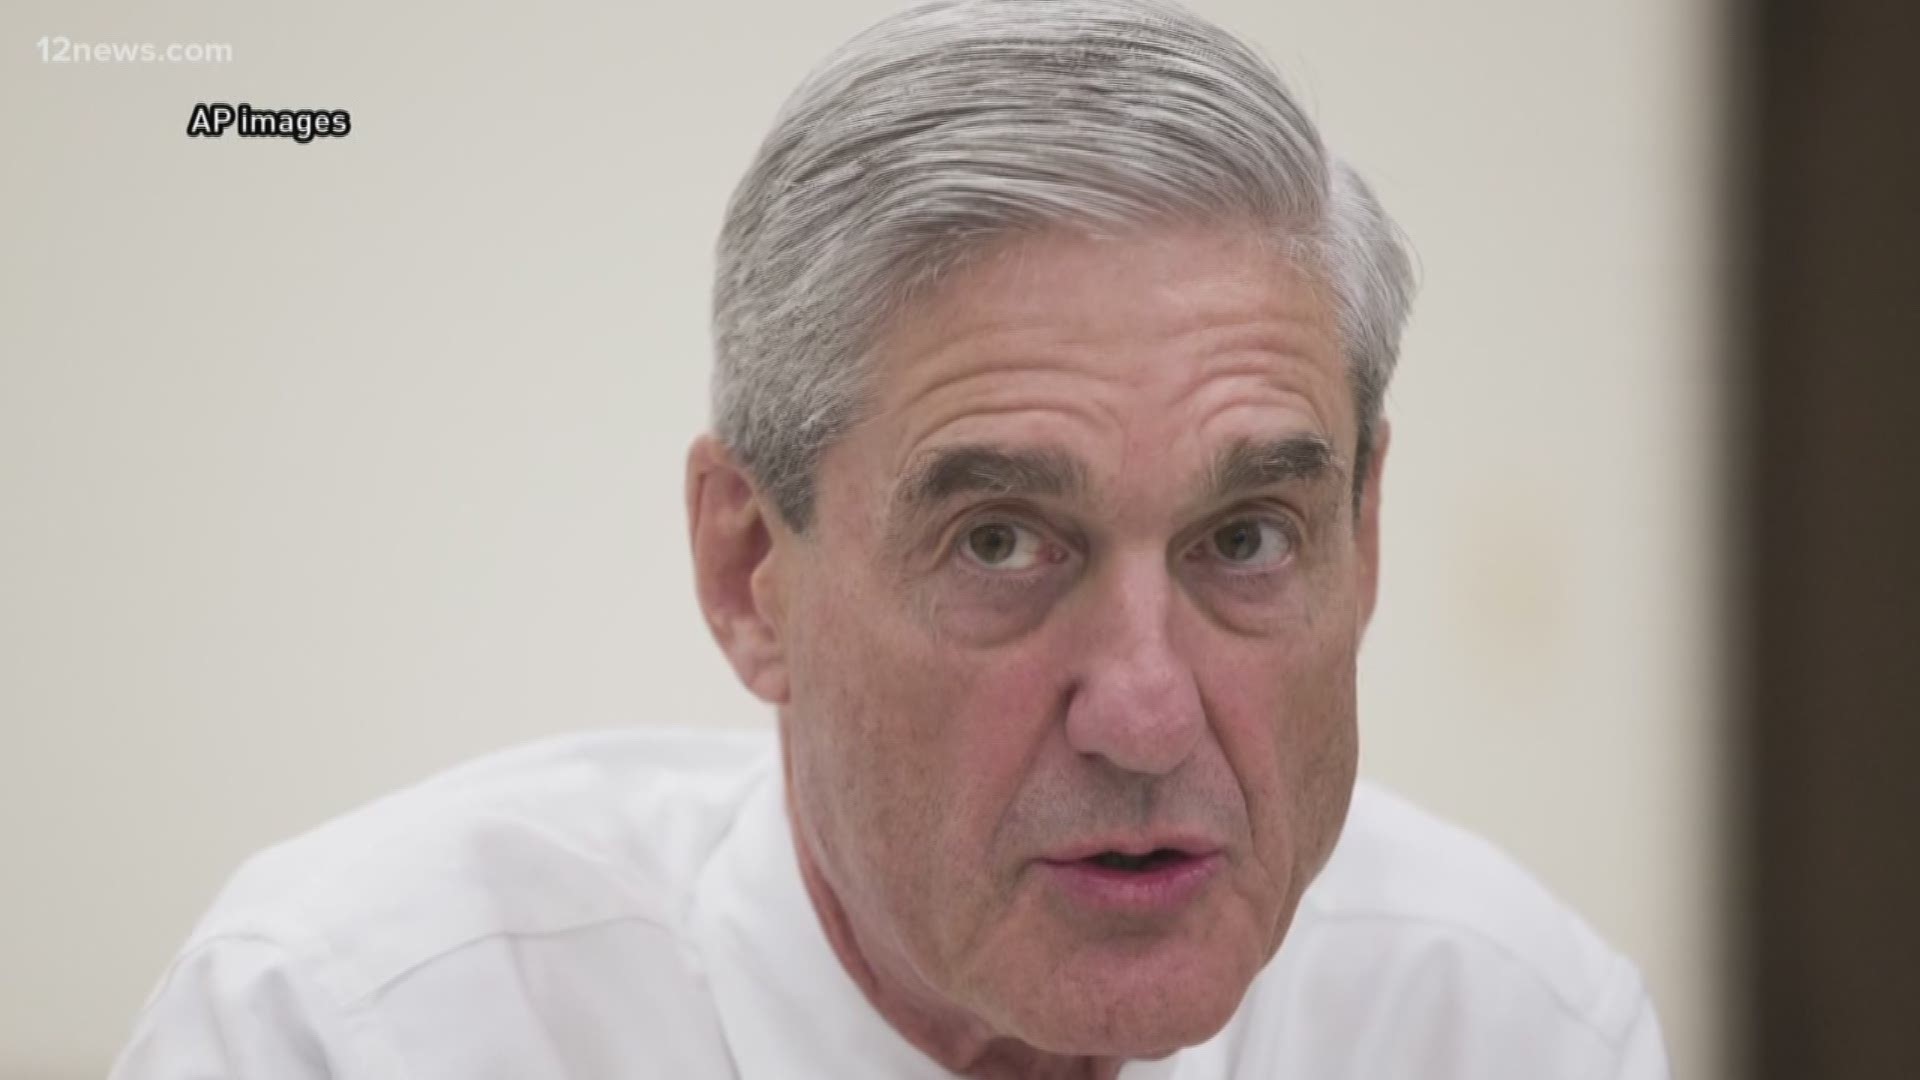 Arizona's lawmakers are responding to Special Counsel Robert Mueller's comments about his Russia report. Our two U.S. senators are not talking about the case against President Trump, they're focused on Russian interference in next year's election. Some key members of Congress are saying the case is closed.